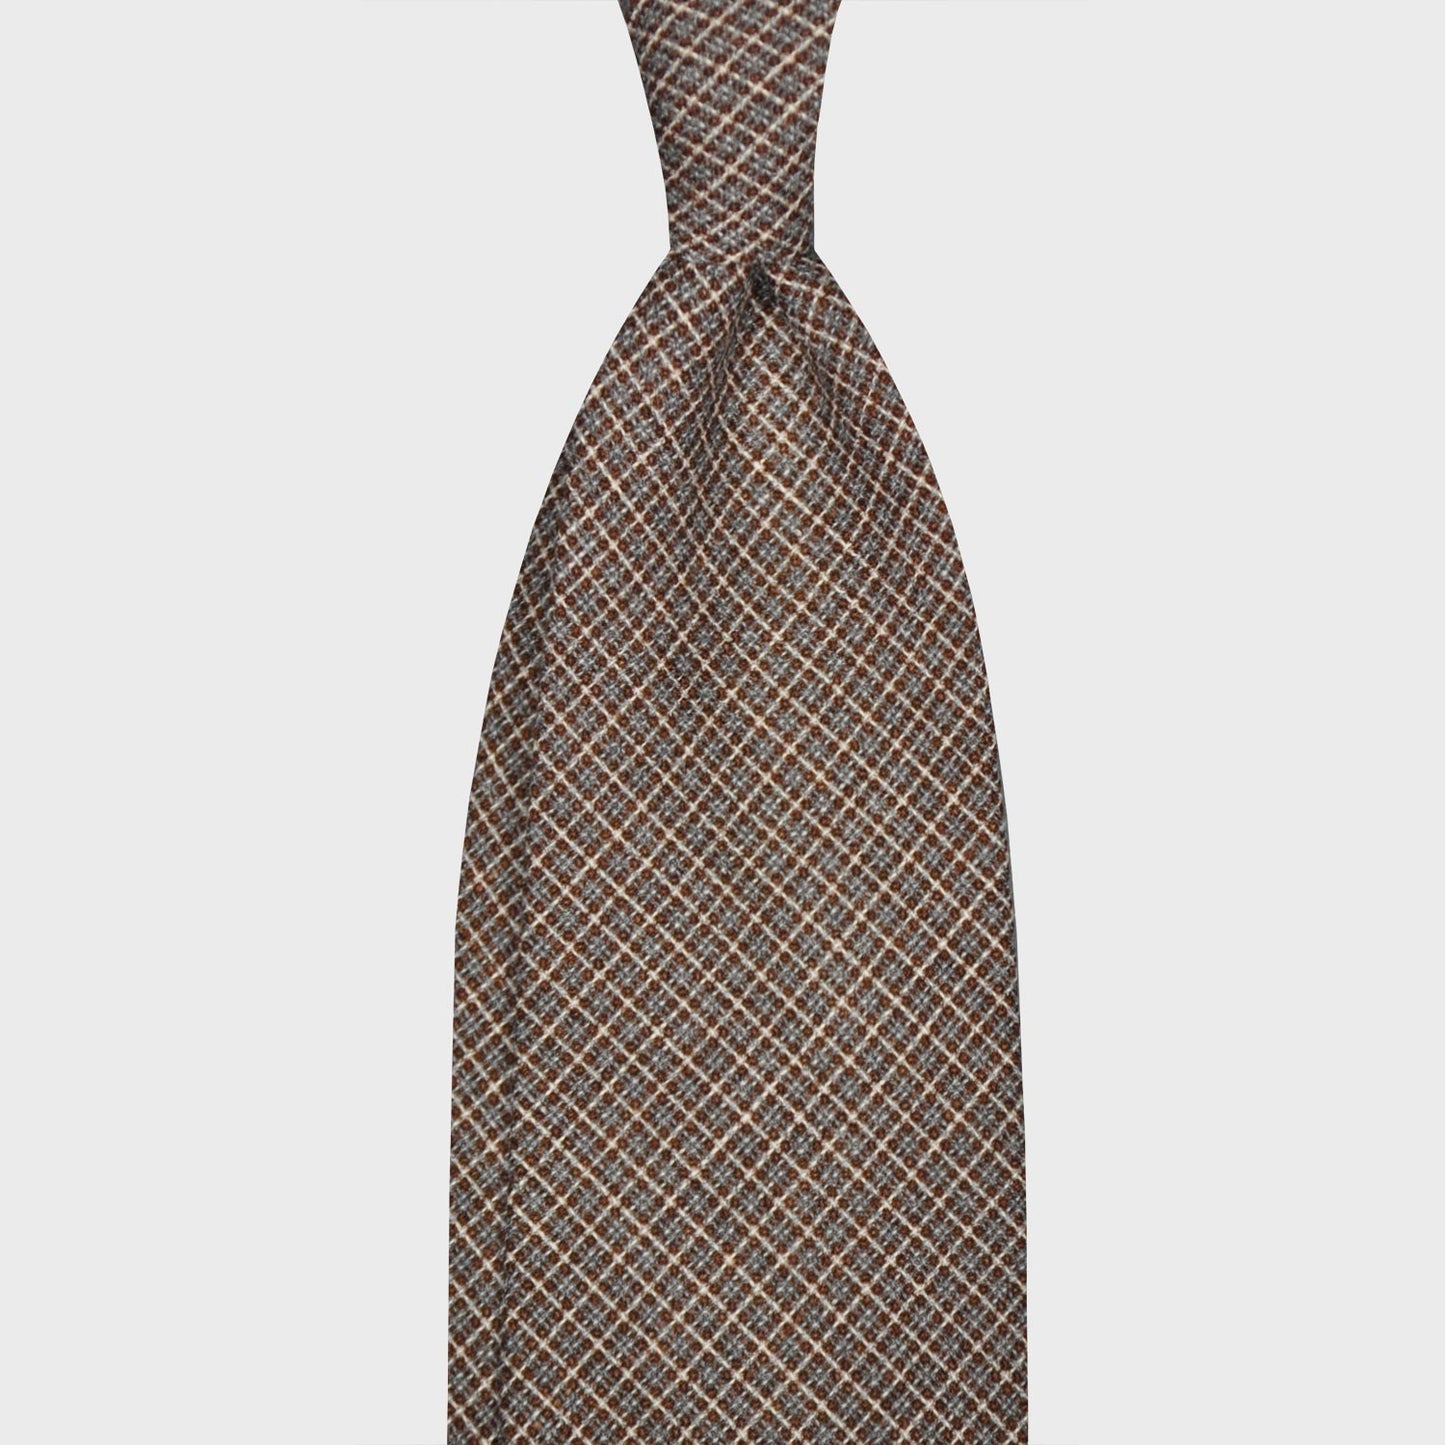 F.Marino Wool Silk Tie 3 Folds Micro Textured Squares Coffee Brown-Wools Boutique Uomo